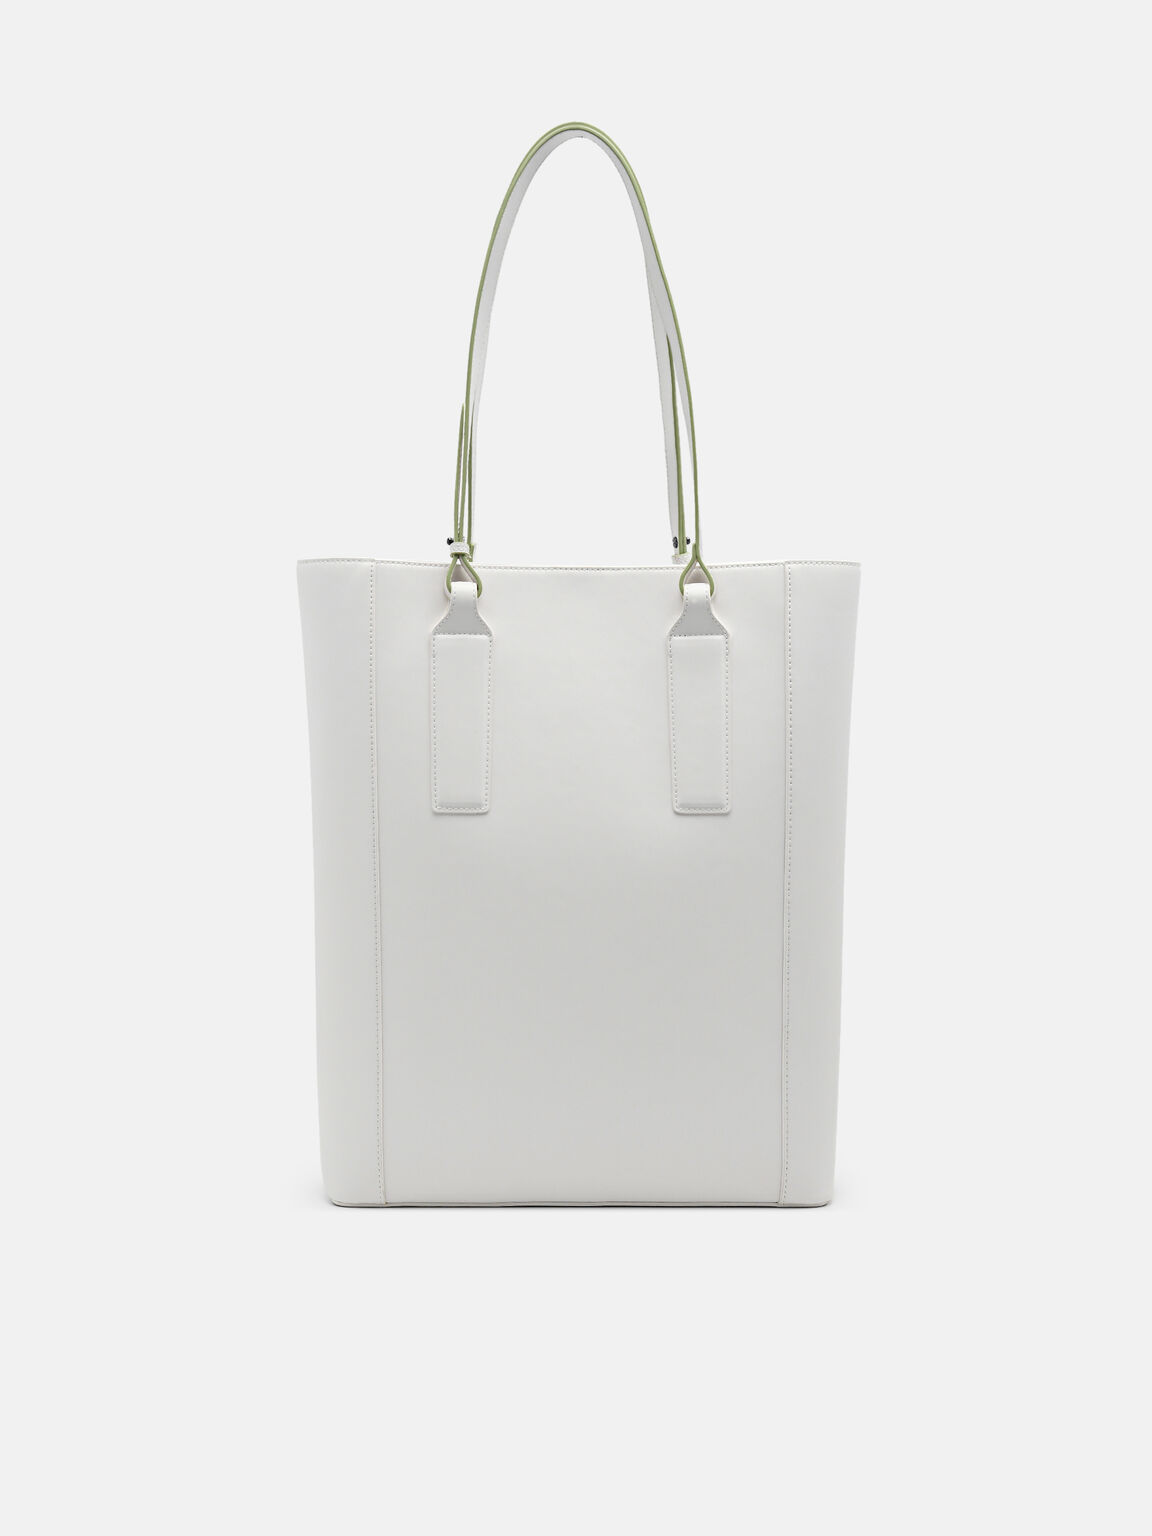 rePEDRO Recycled Leather Tote Bag, White